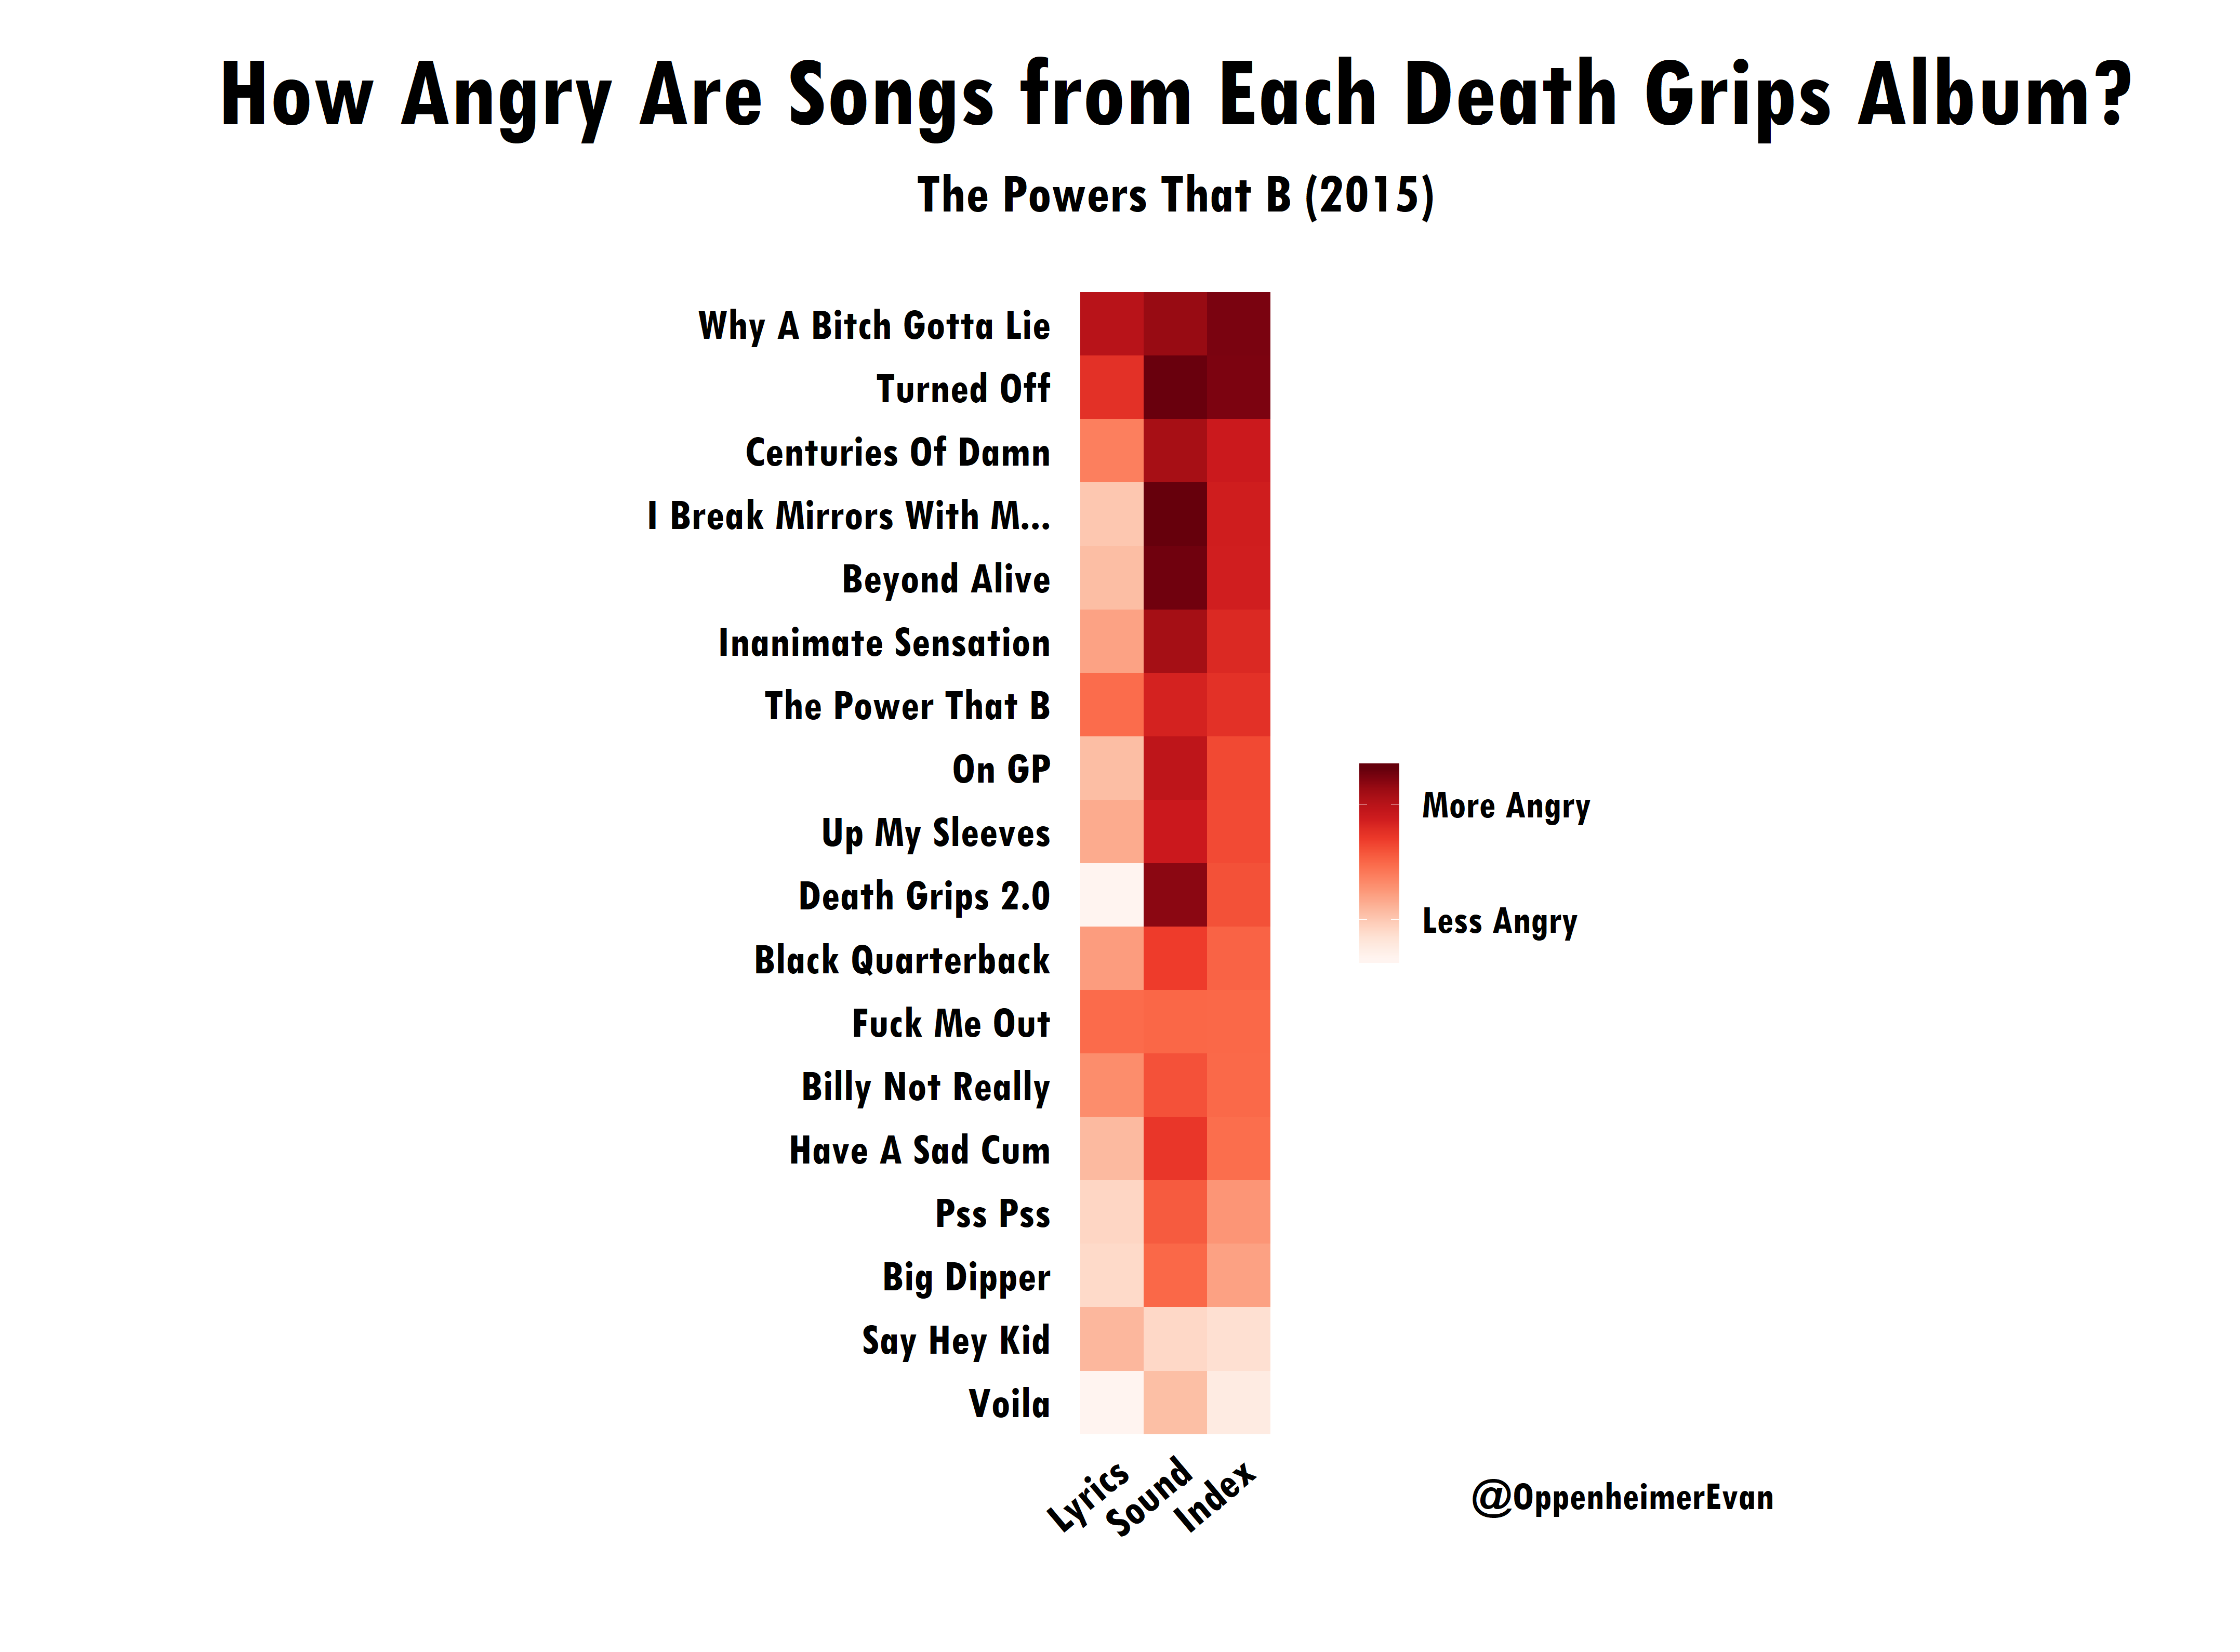 Using Data To Find The Angriest Death Grips Song A Code Through By Evan Oppenheimer Towards Data Science